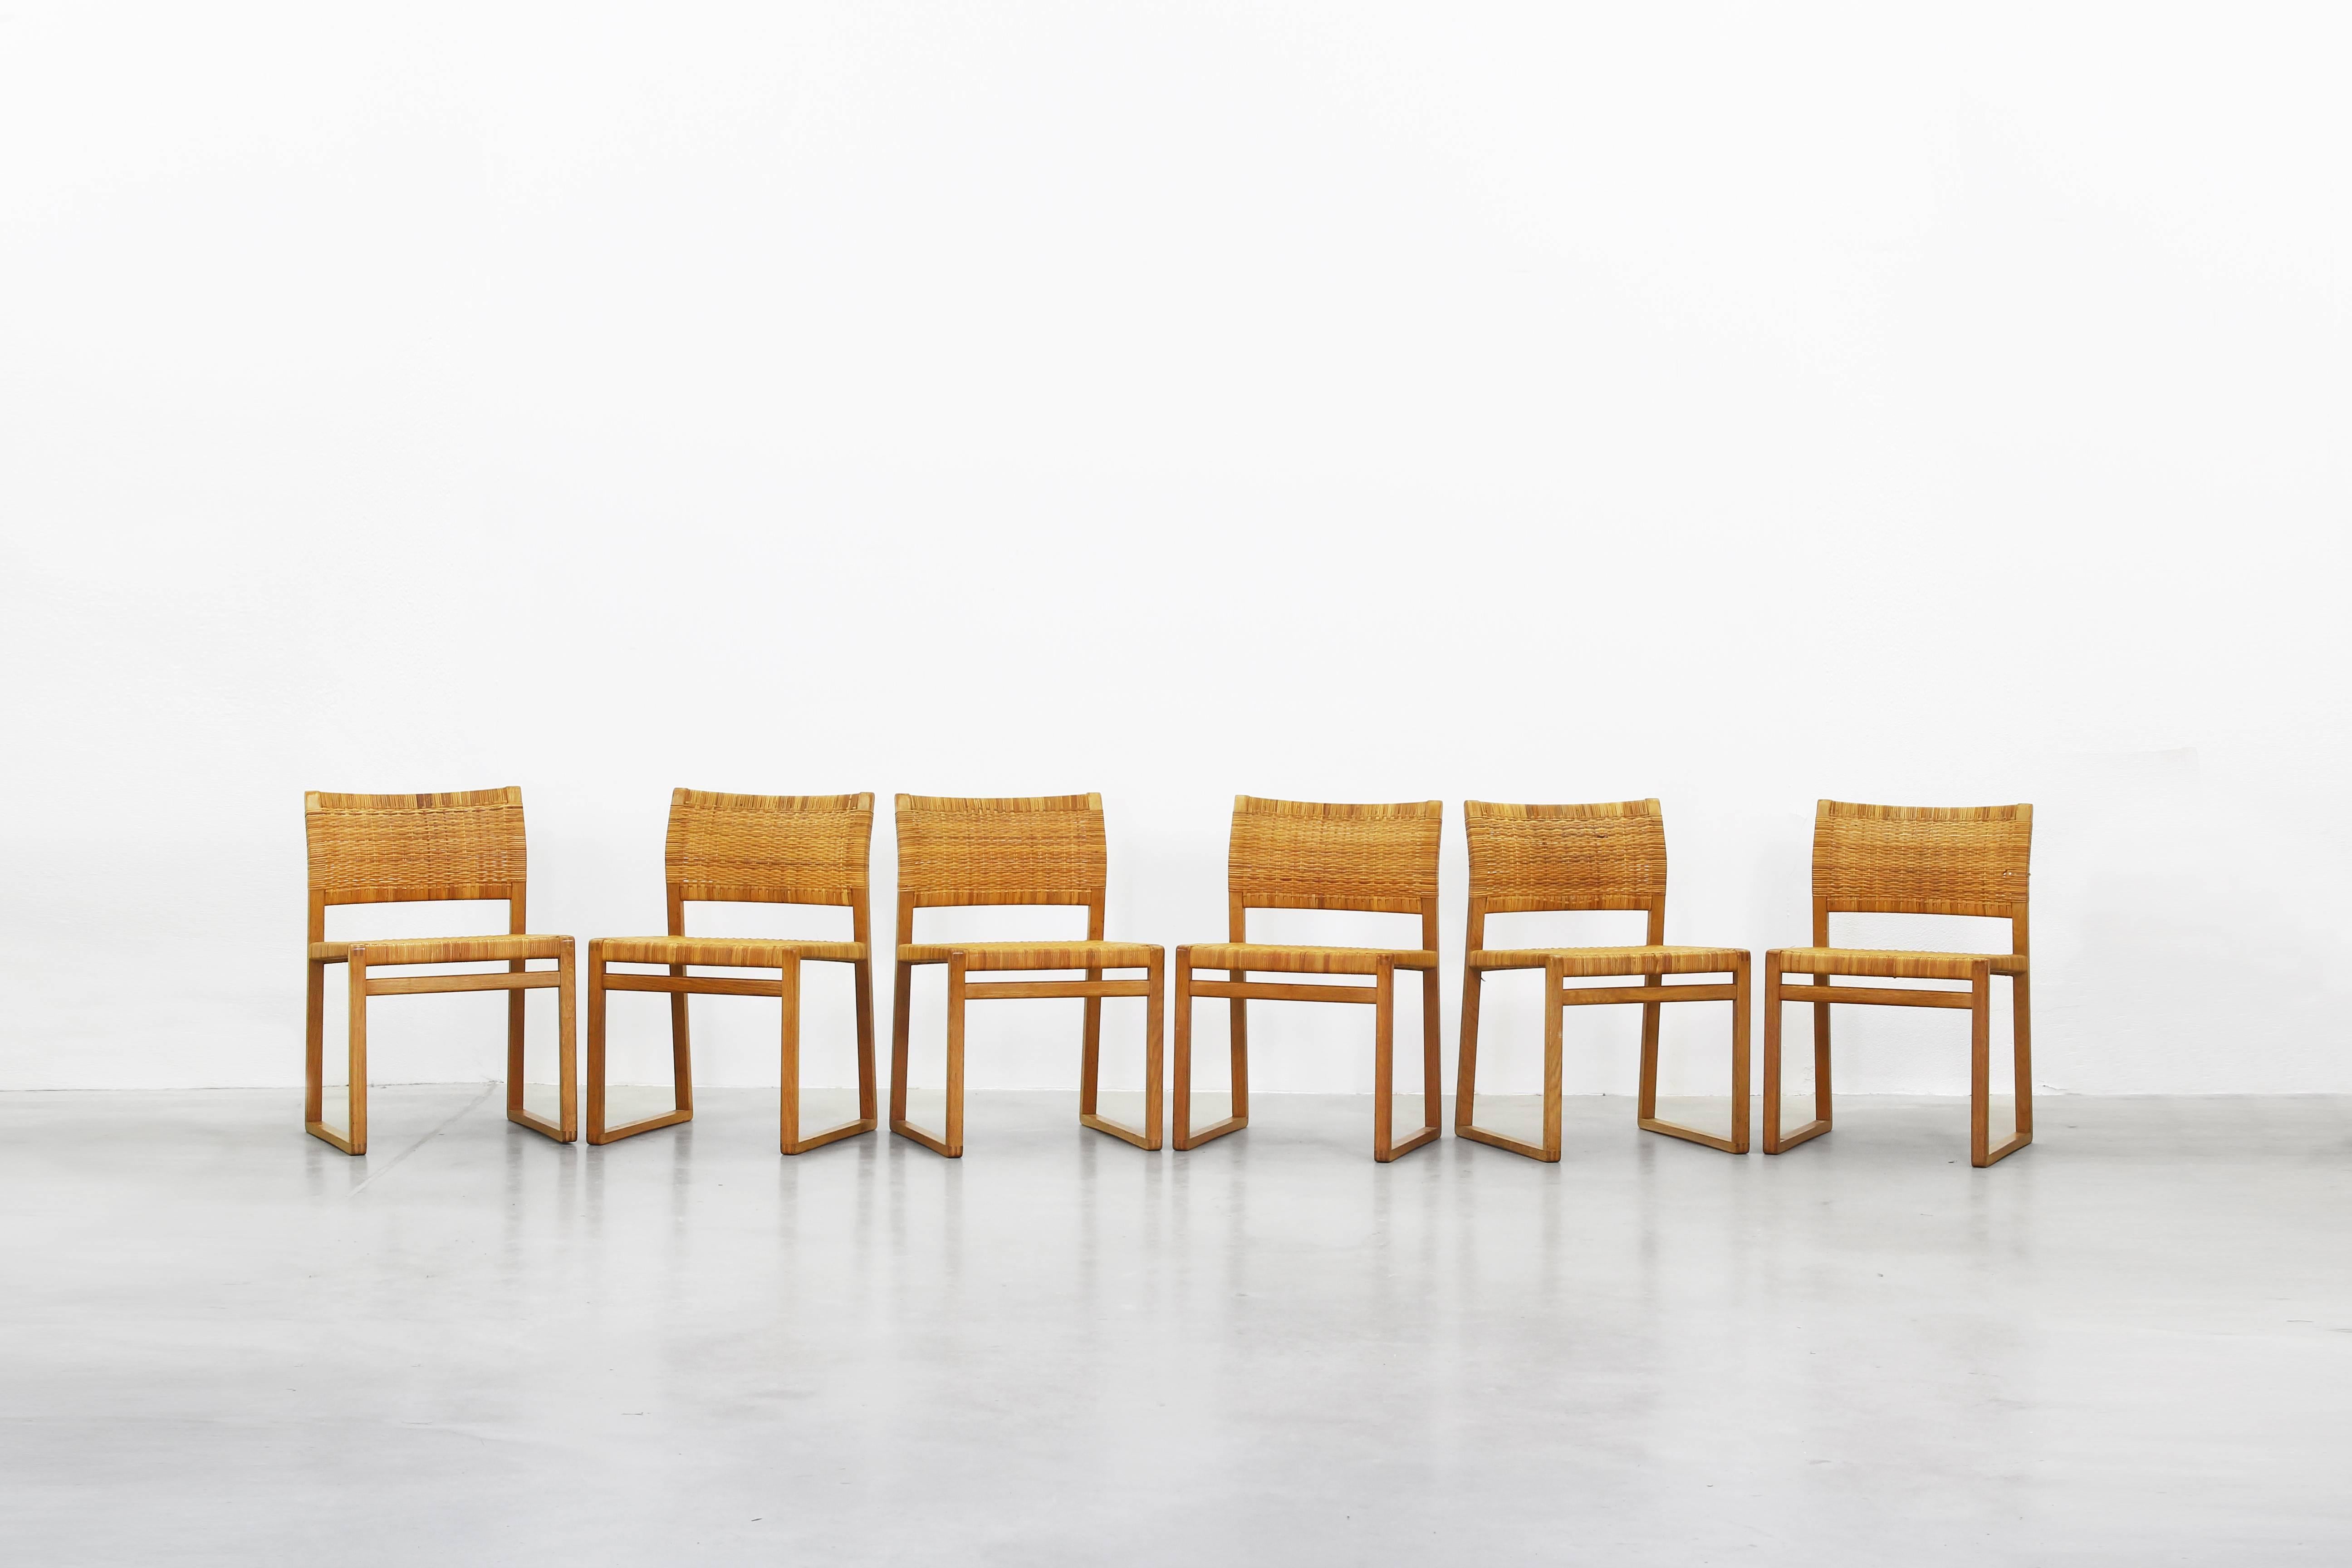 A very beautiful set of dining chairs Mod. BM 61 designed by Børge Mogensen for Fredericia Stolefabrik, Denmark. All chairs are in a very good condition with just little traces of usage. The frame made of oak comes in a great patinated wood. We have